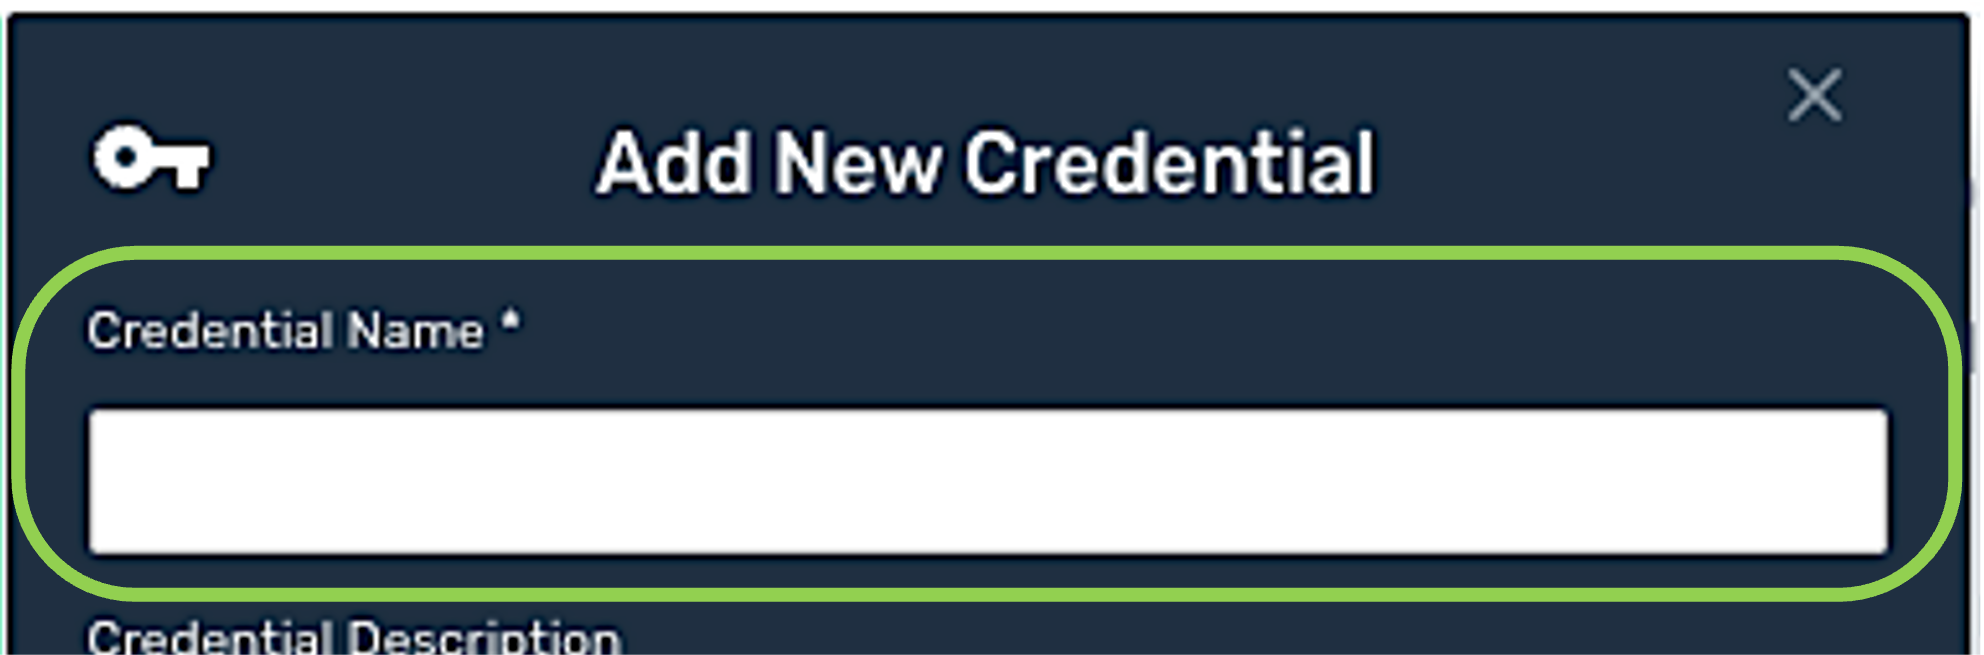 AddNewCredential.png